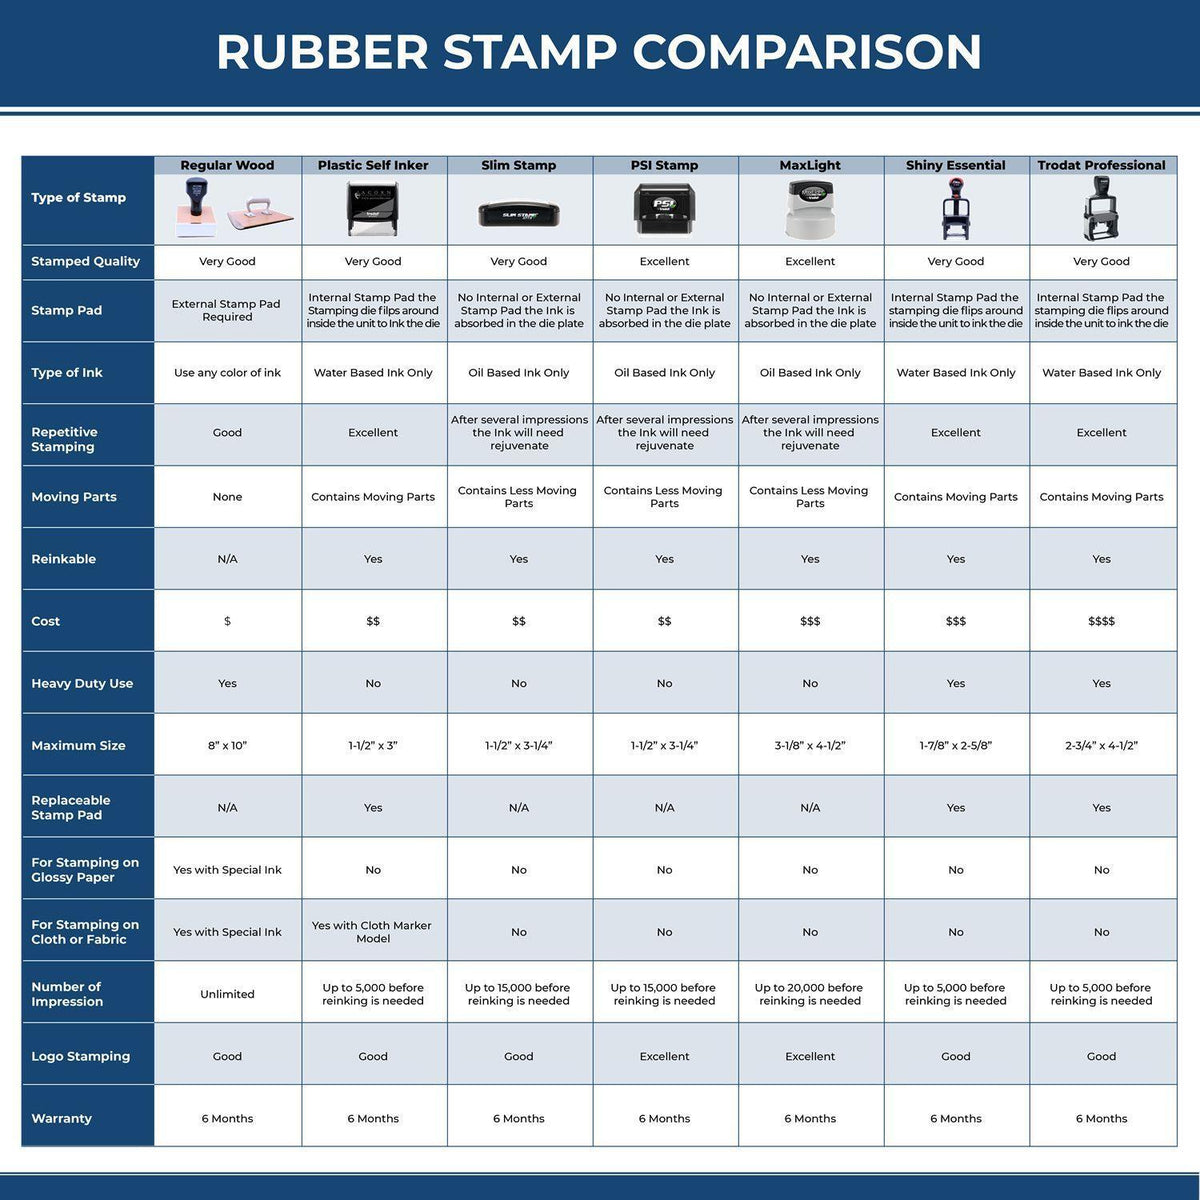 Large Anesthesiology Rubber Stamp 4540R Rubber Stamp Comparison